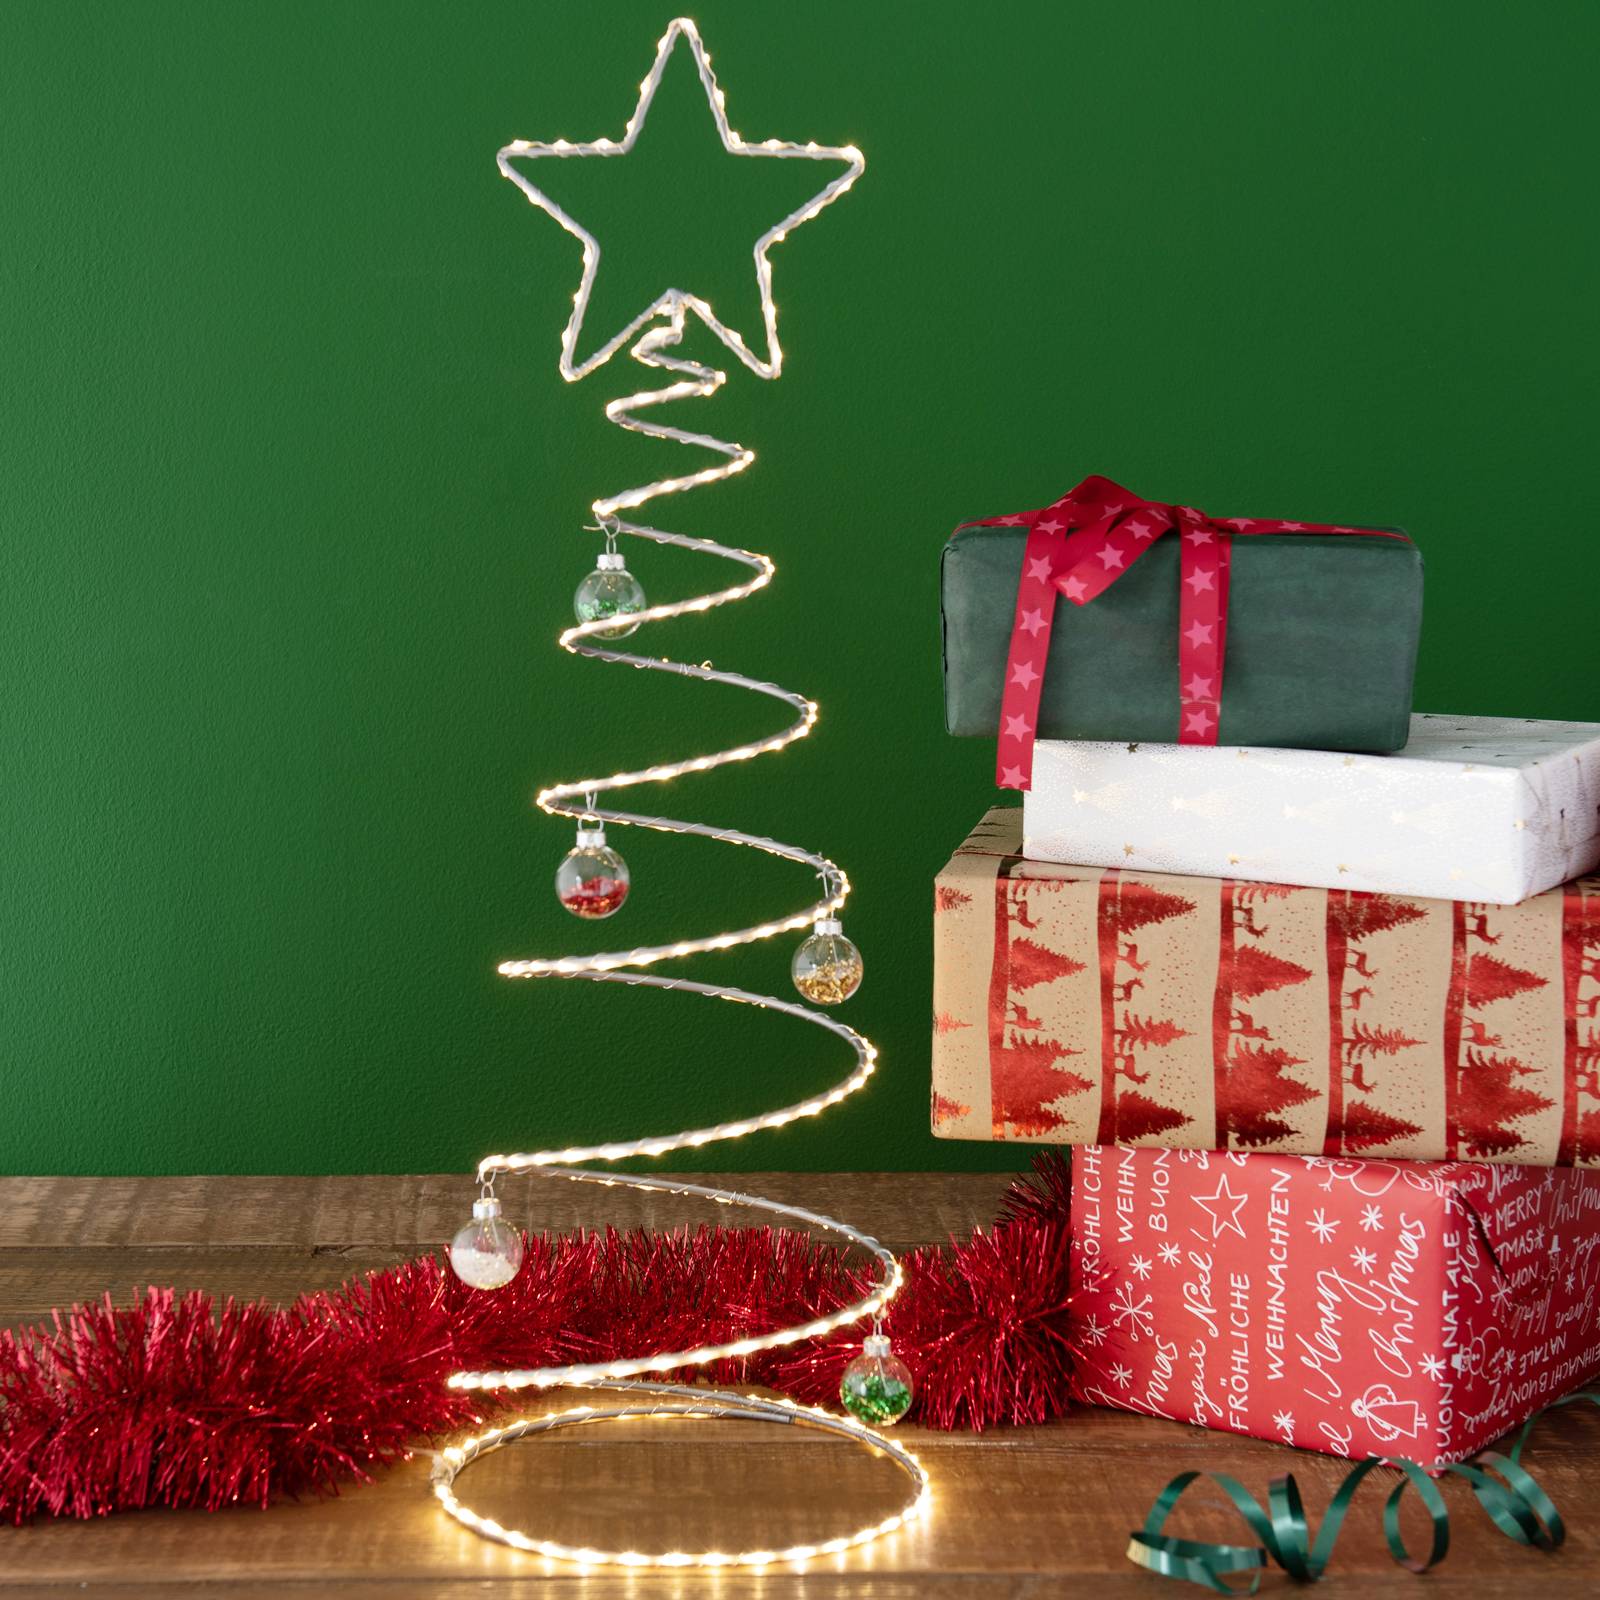 15 Easy and Simple Ideas to Decorate Your Home on Christmas